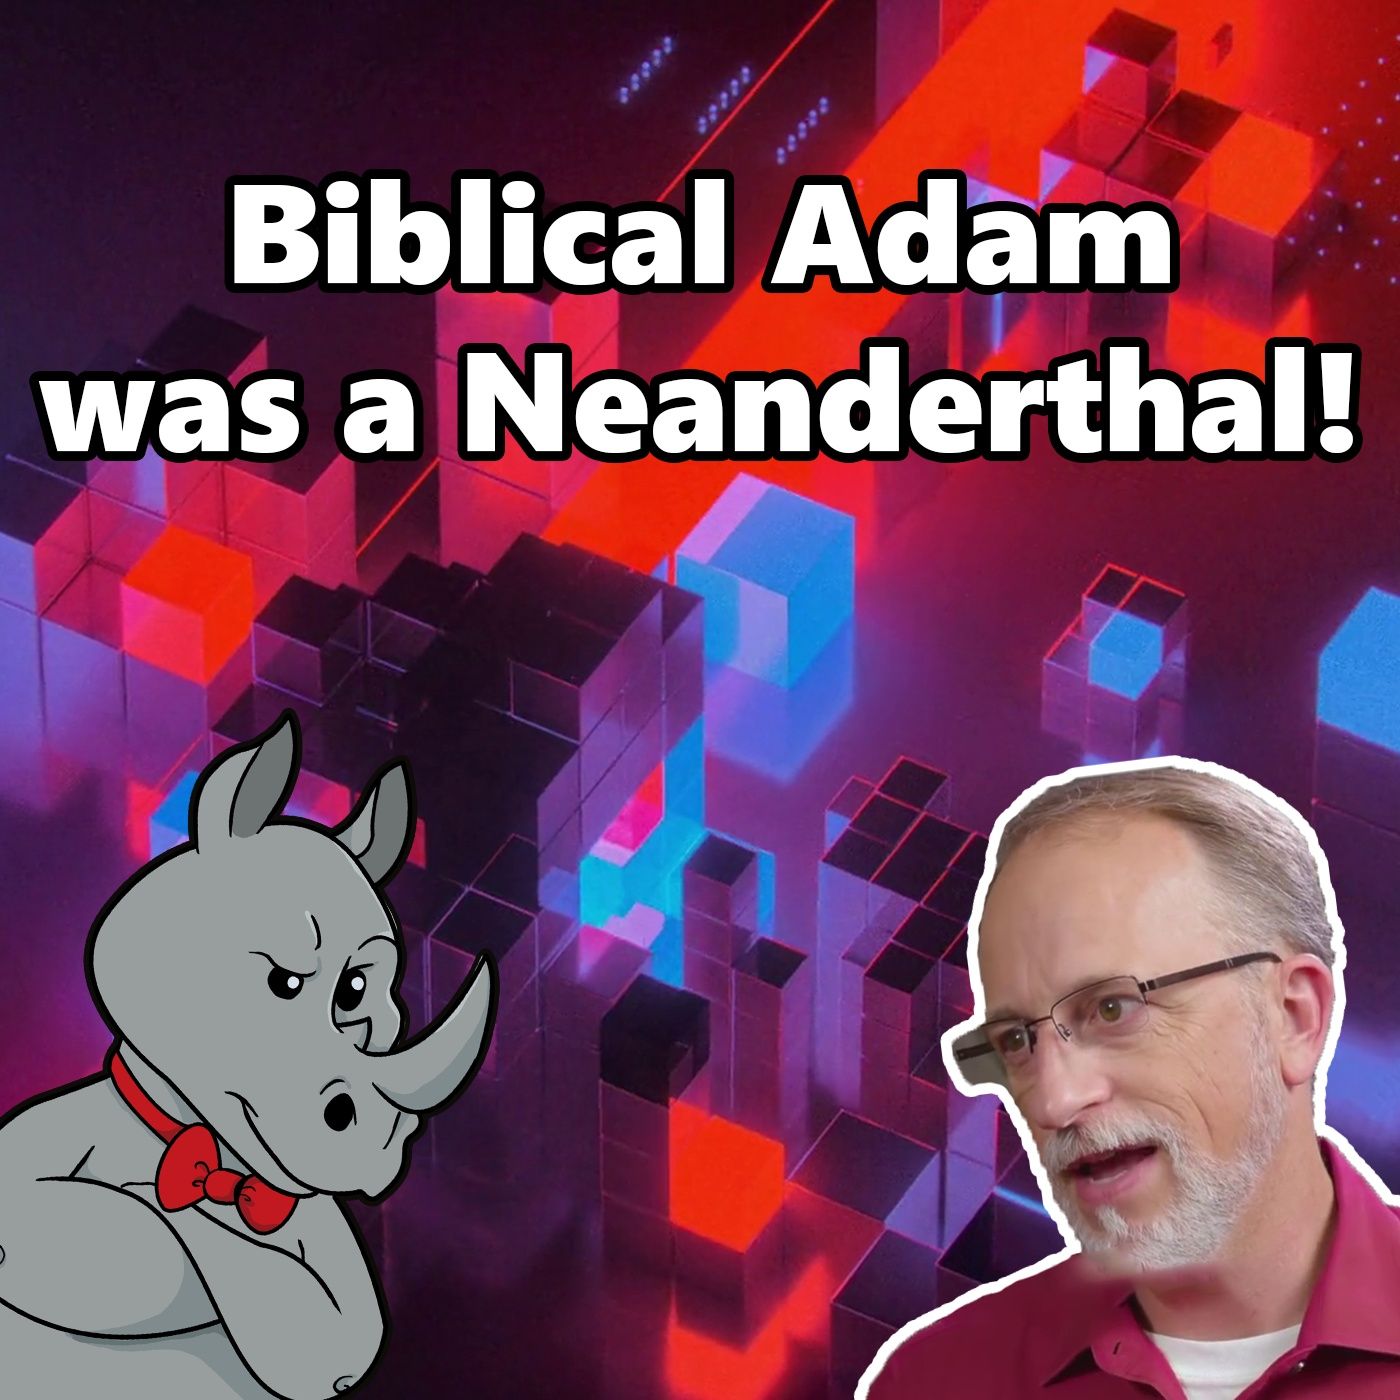 The Real Adam was a Neanderthal!